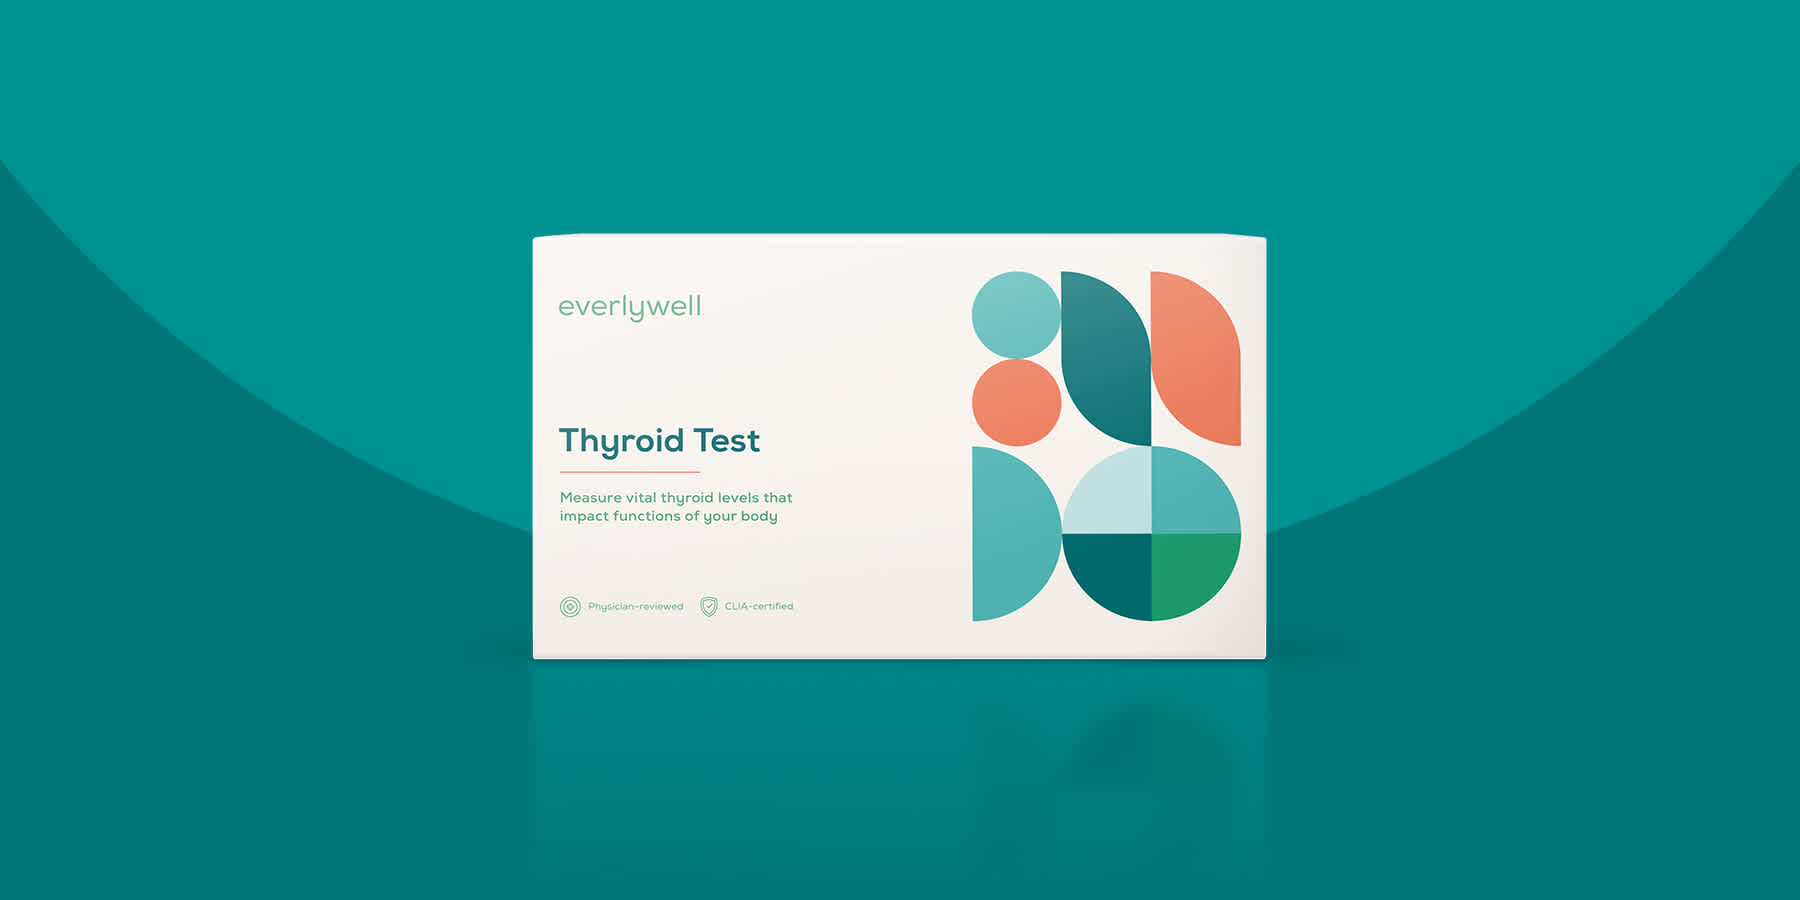 Image of Everlywell Thyroid Test kit against a teal background